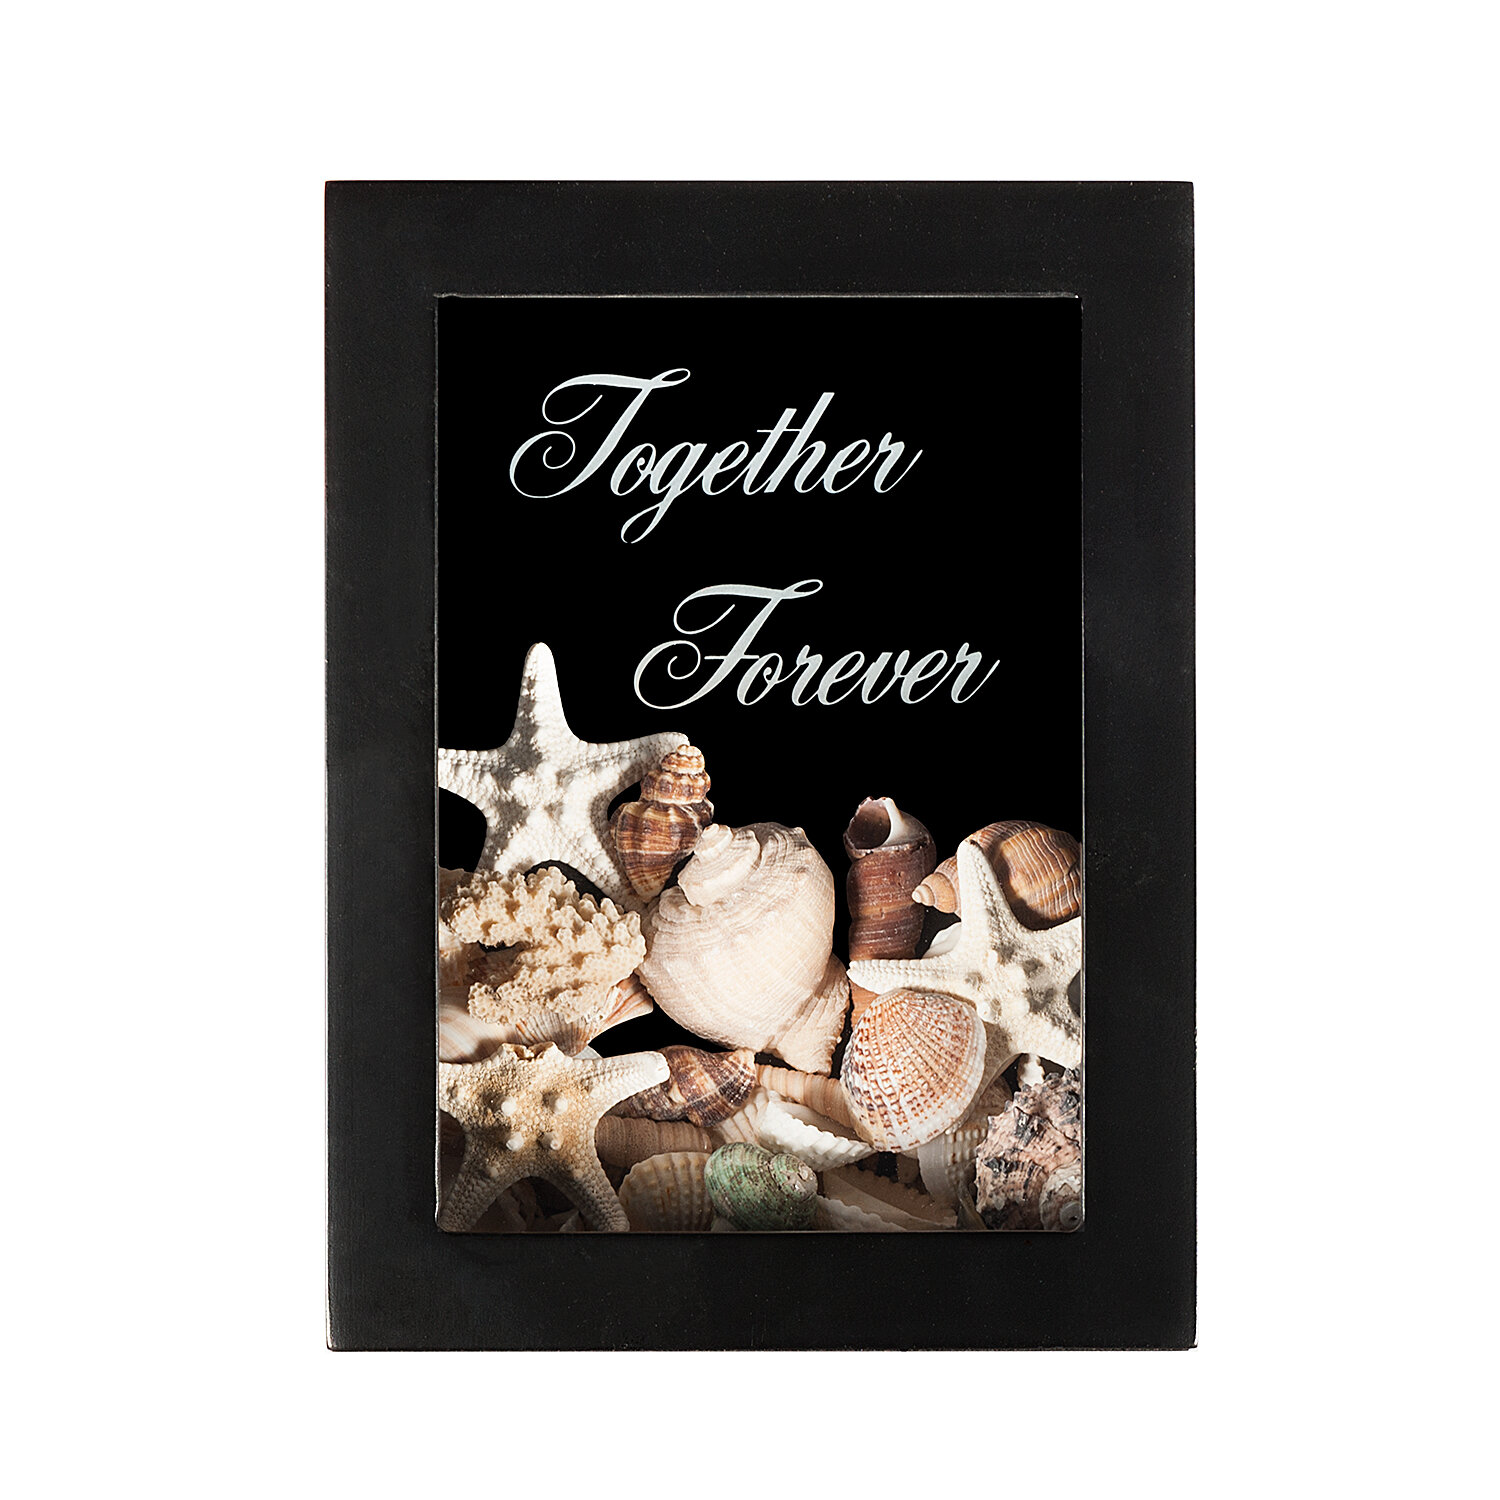 Bless Your Heart Together Forever Shadow Box Frame Unity Sand Ceremony